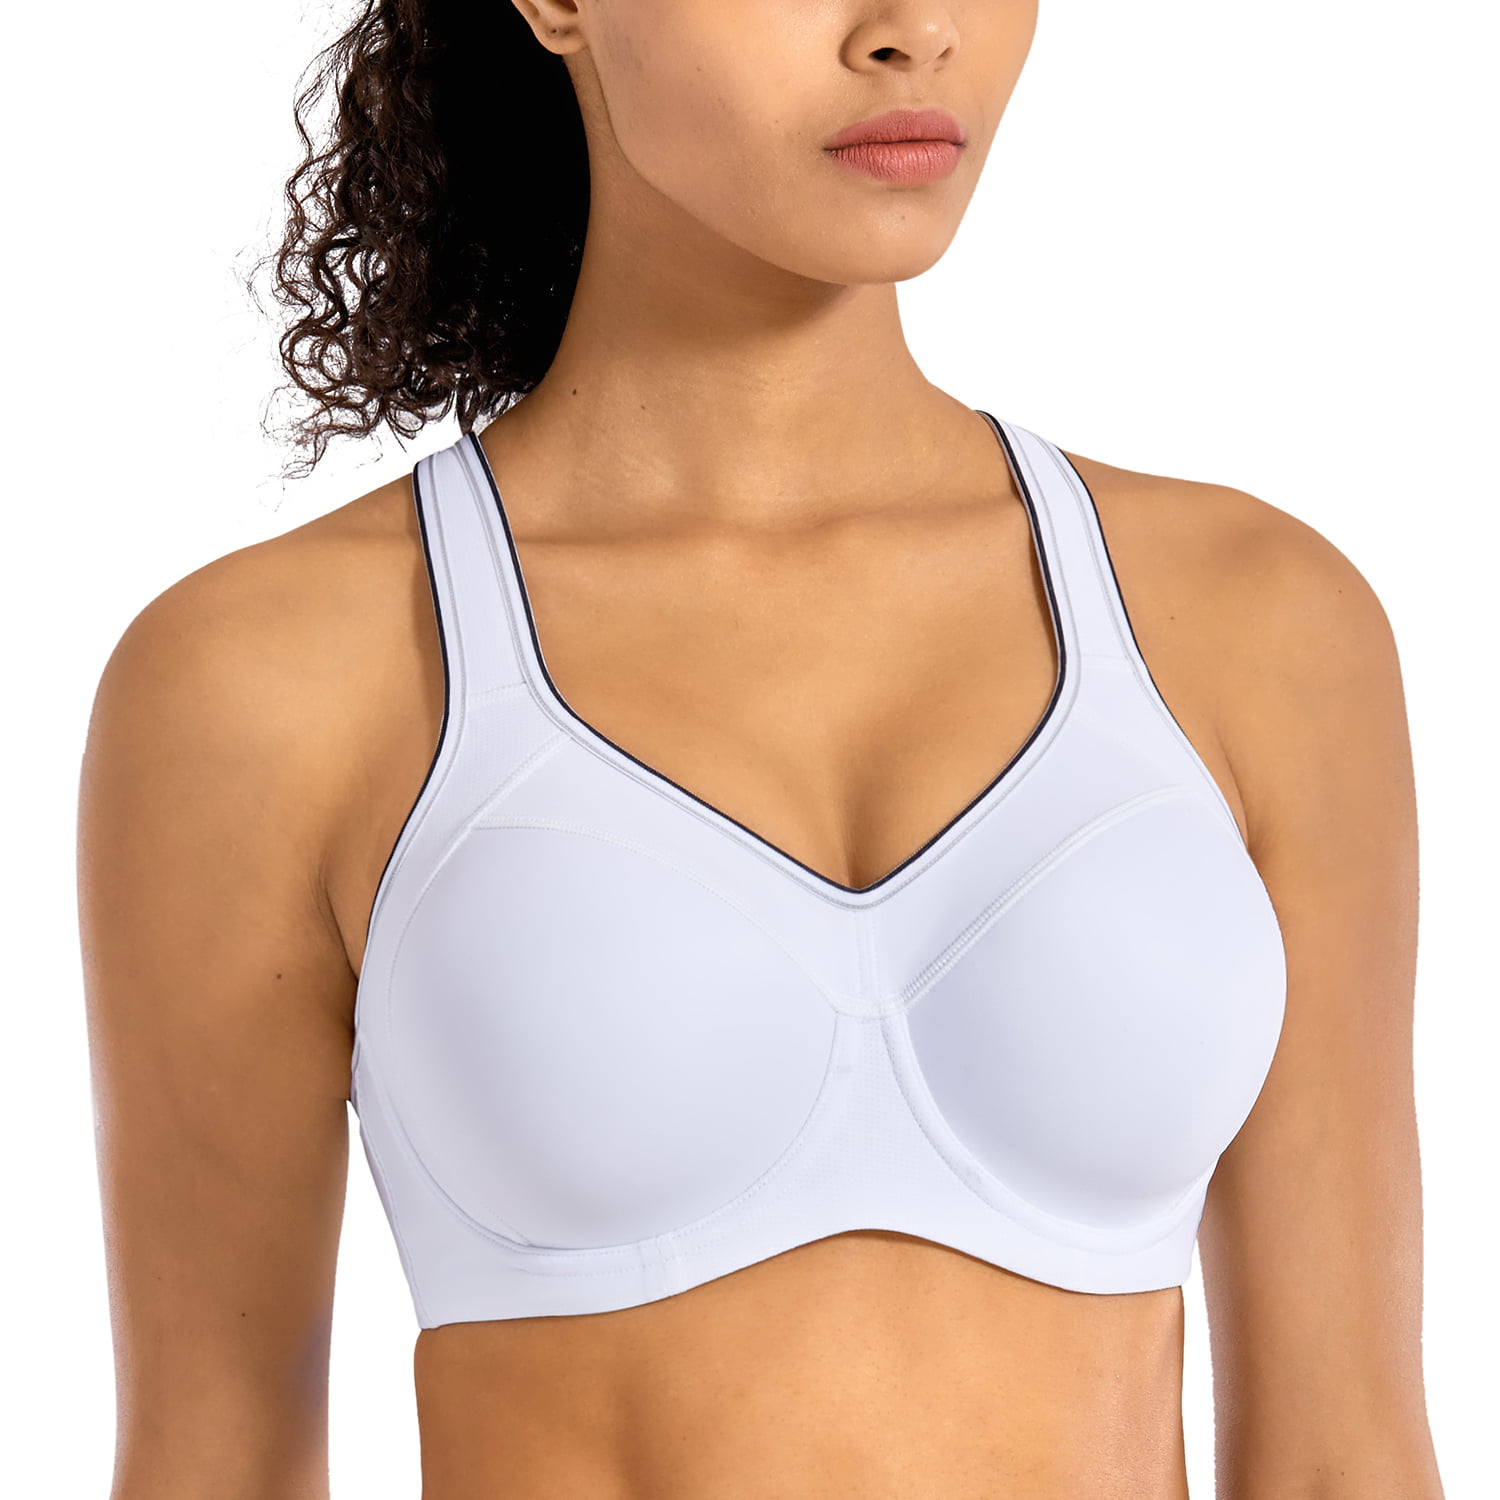 SYROKAN Womens Full Support High Impact Racerback Lightly Lined Underwire Sports Bra